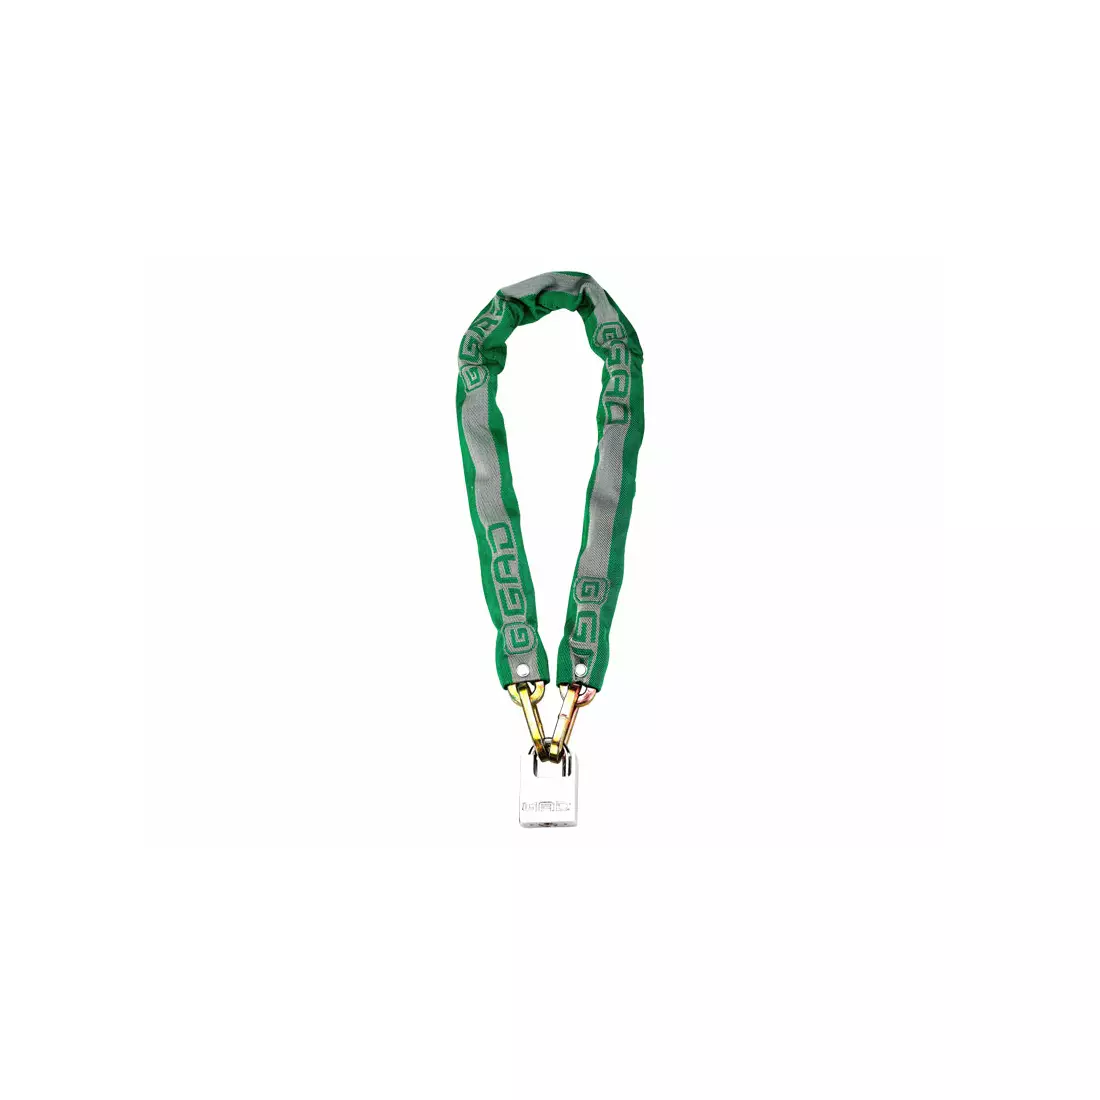 Bicycle lock GAD AMROX 6x6x900mm chain, tempered zell green GAD-GD81006-GN